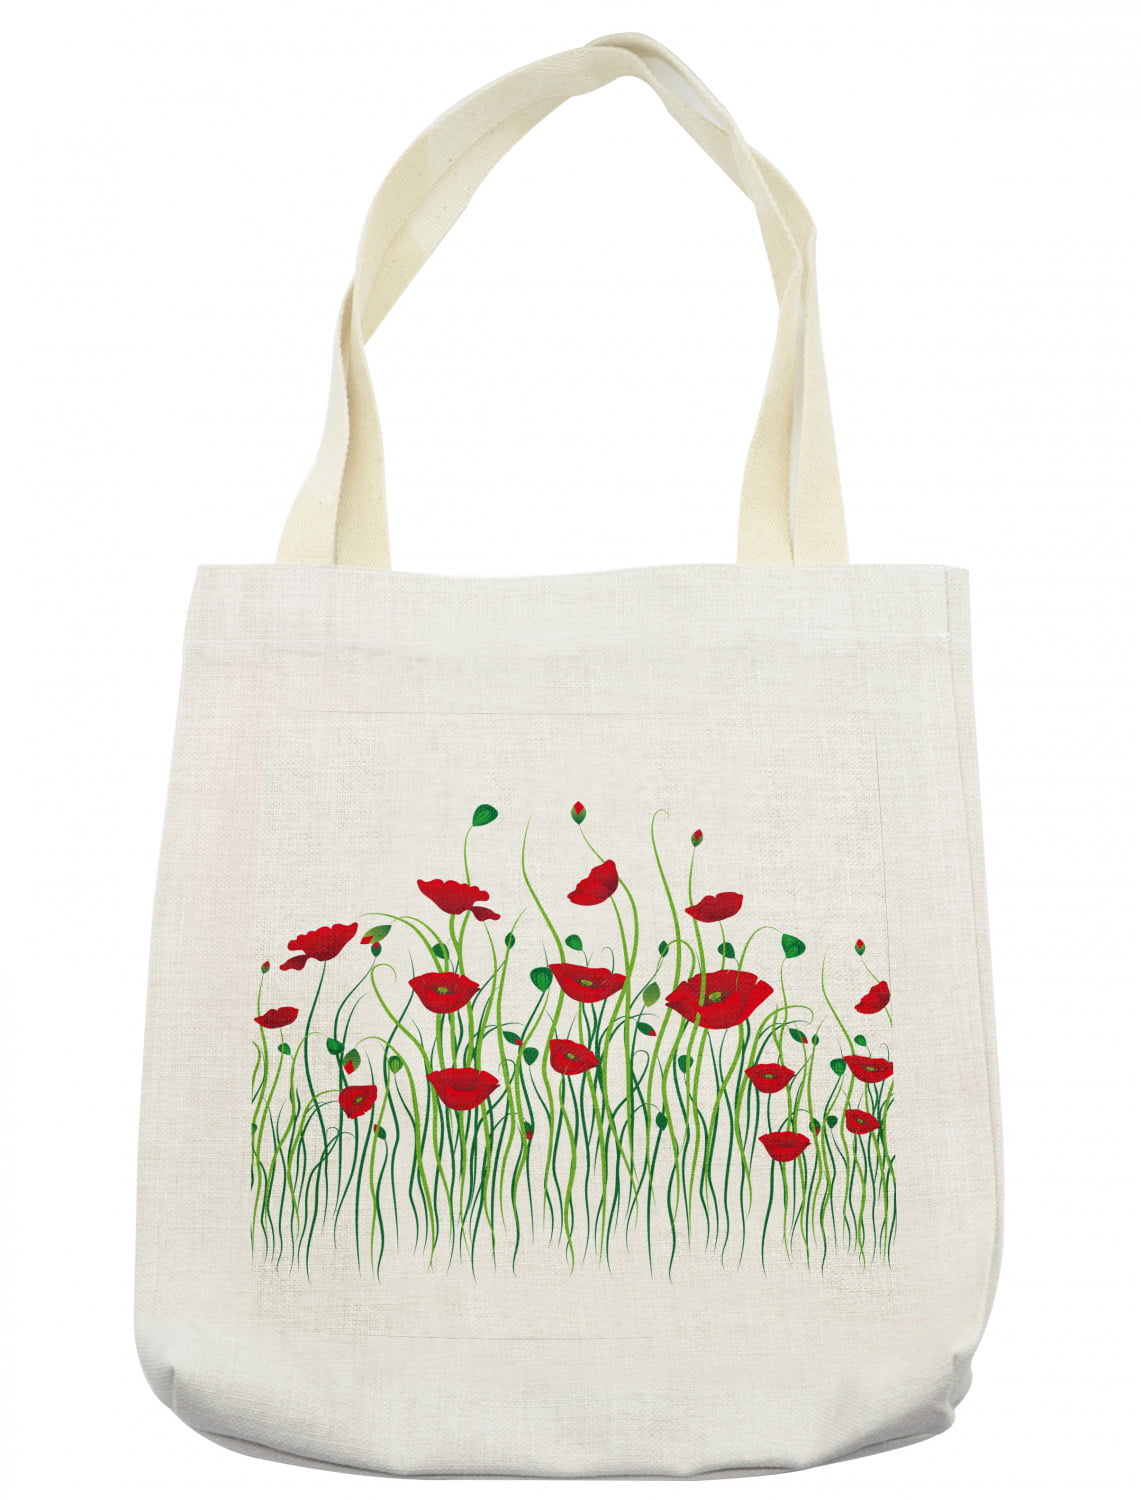 Poppy Tote Bag, Scarlet Flowers and Buds on a Rural Field Refreshing ...